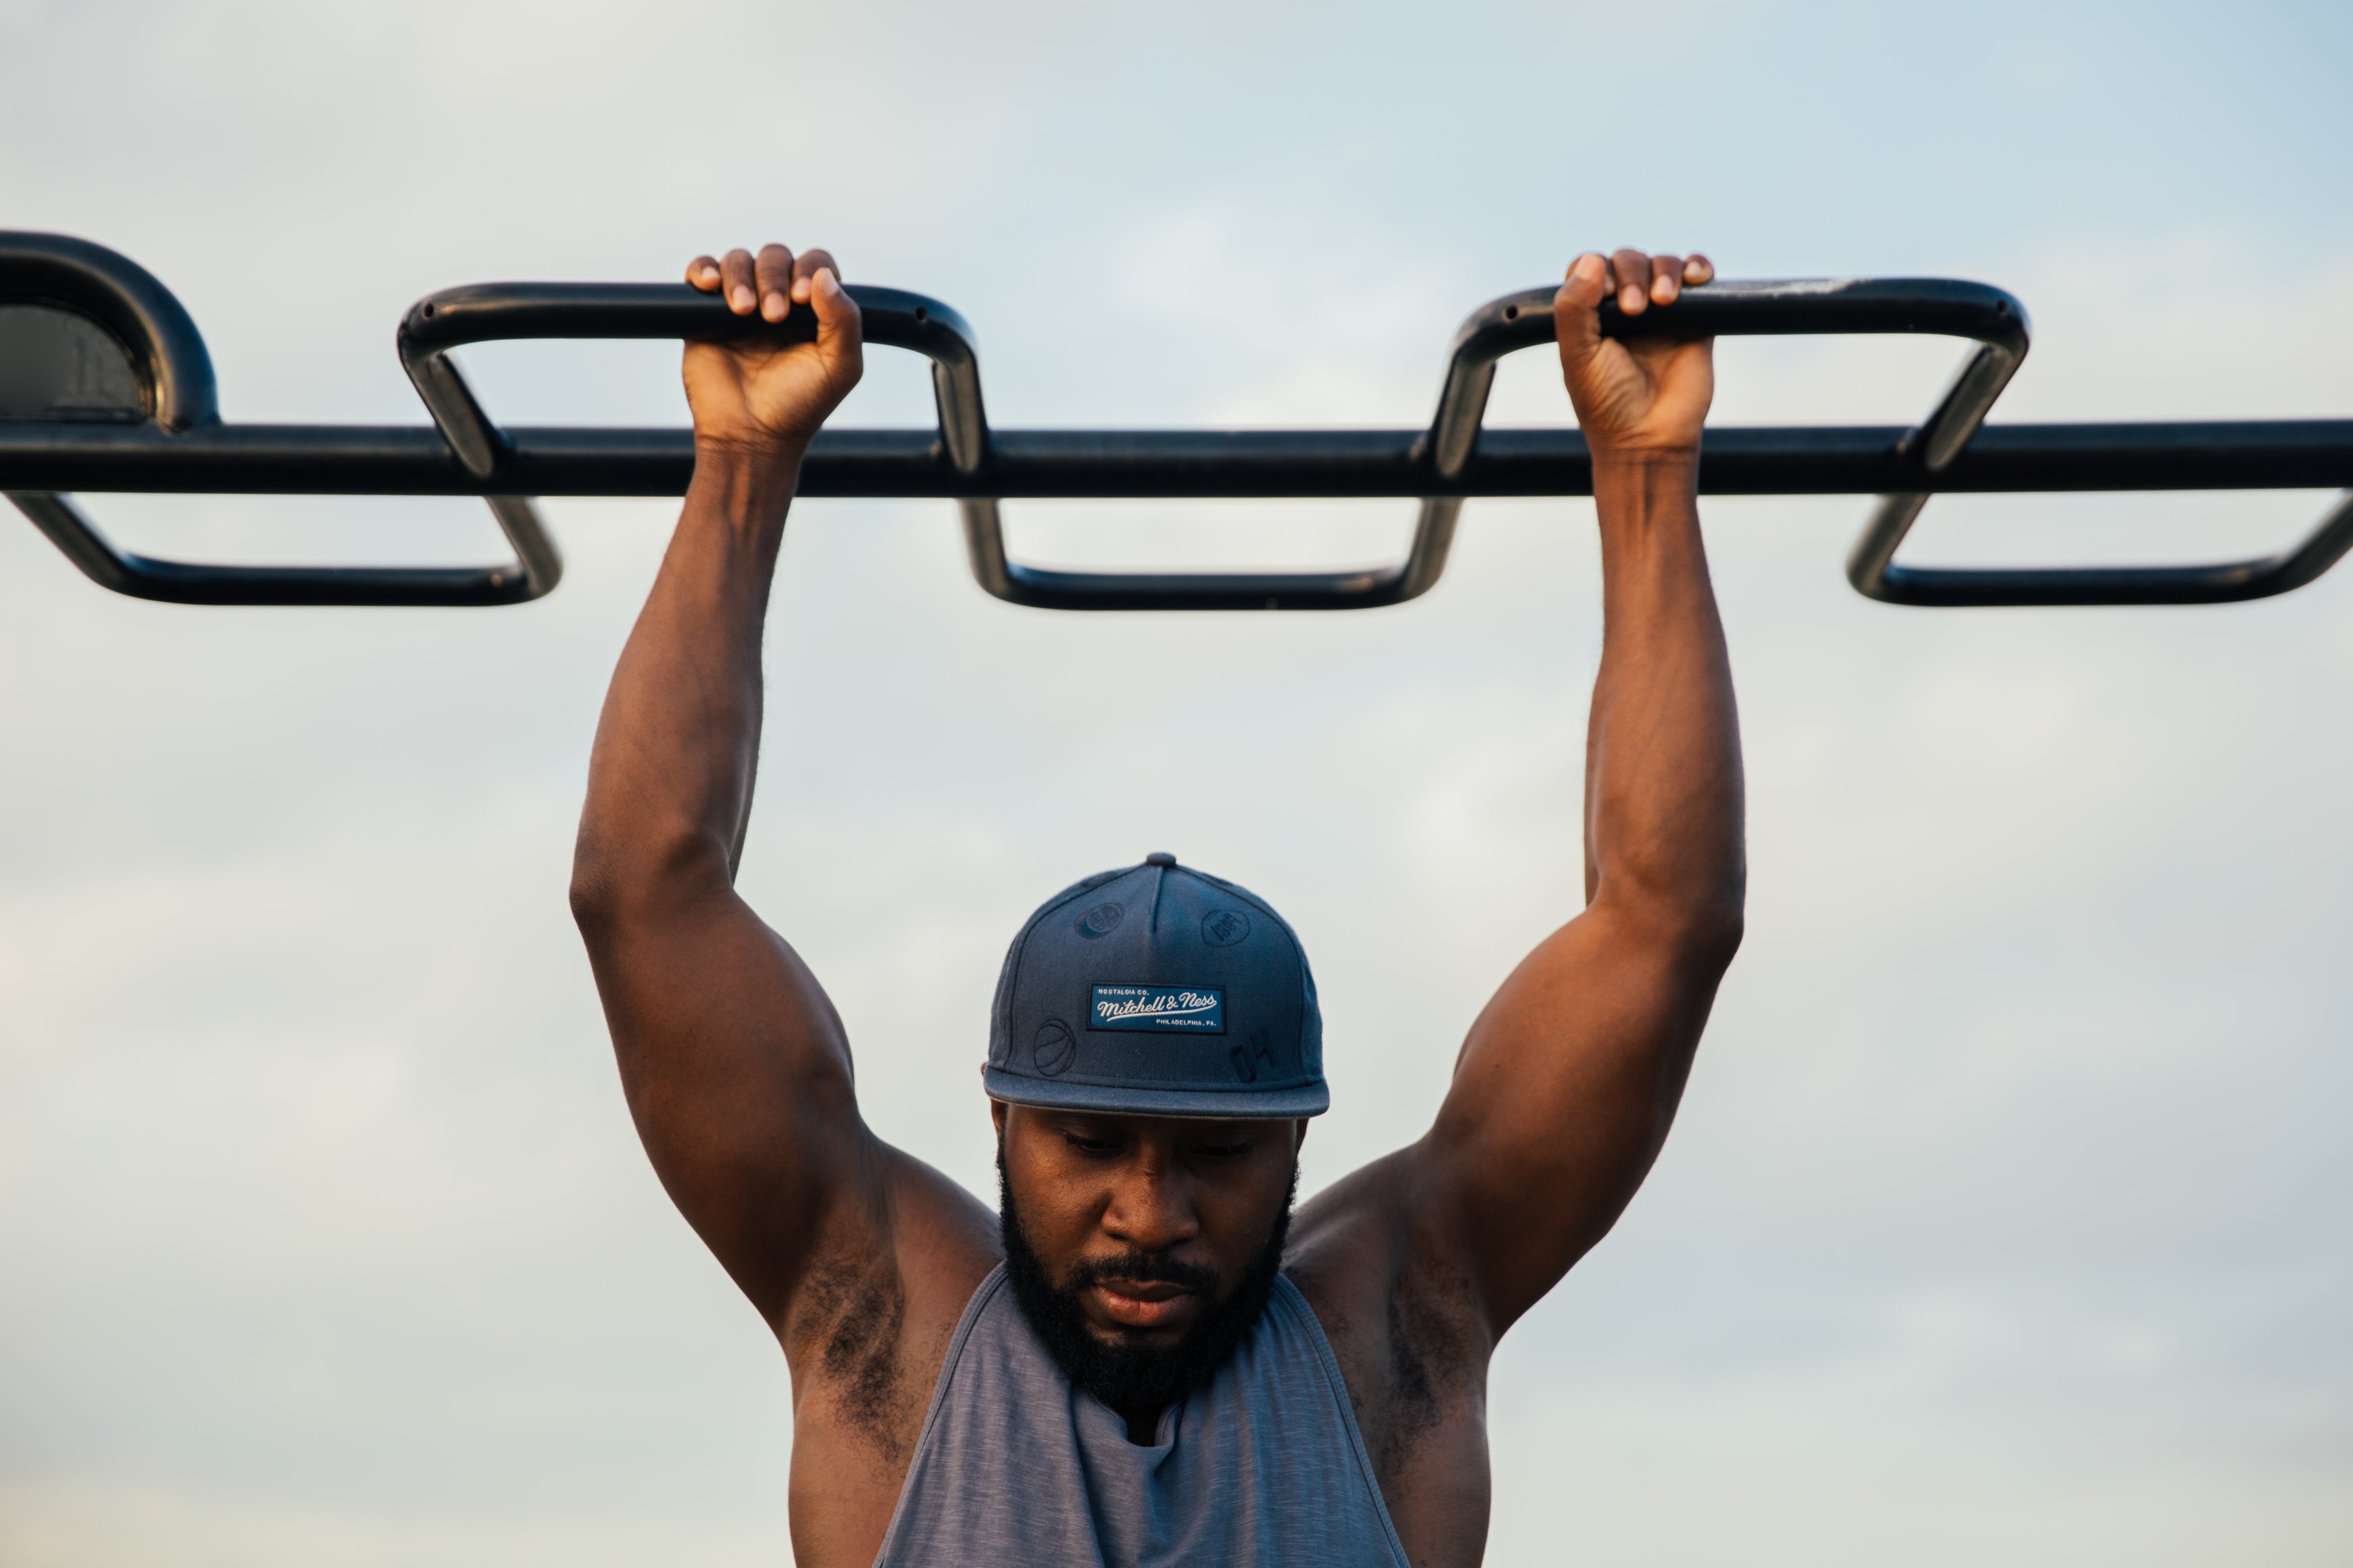 Muscular black man wearing a tank top and hat, hanging on pull up bar